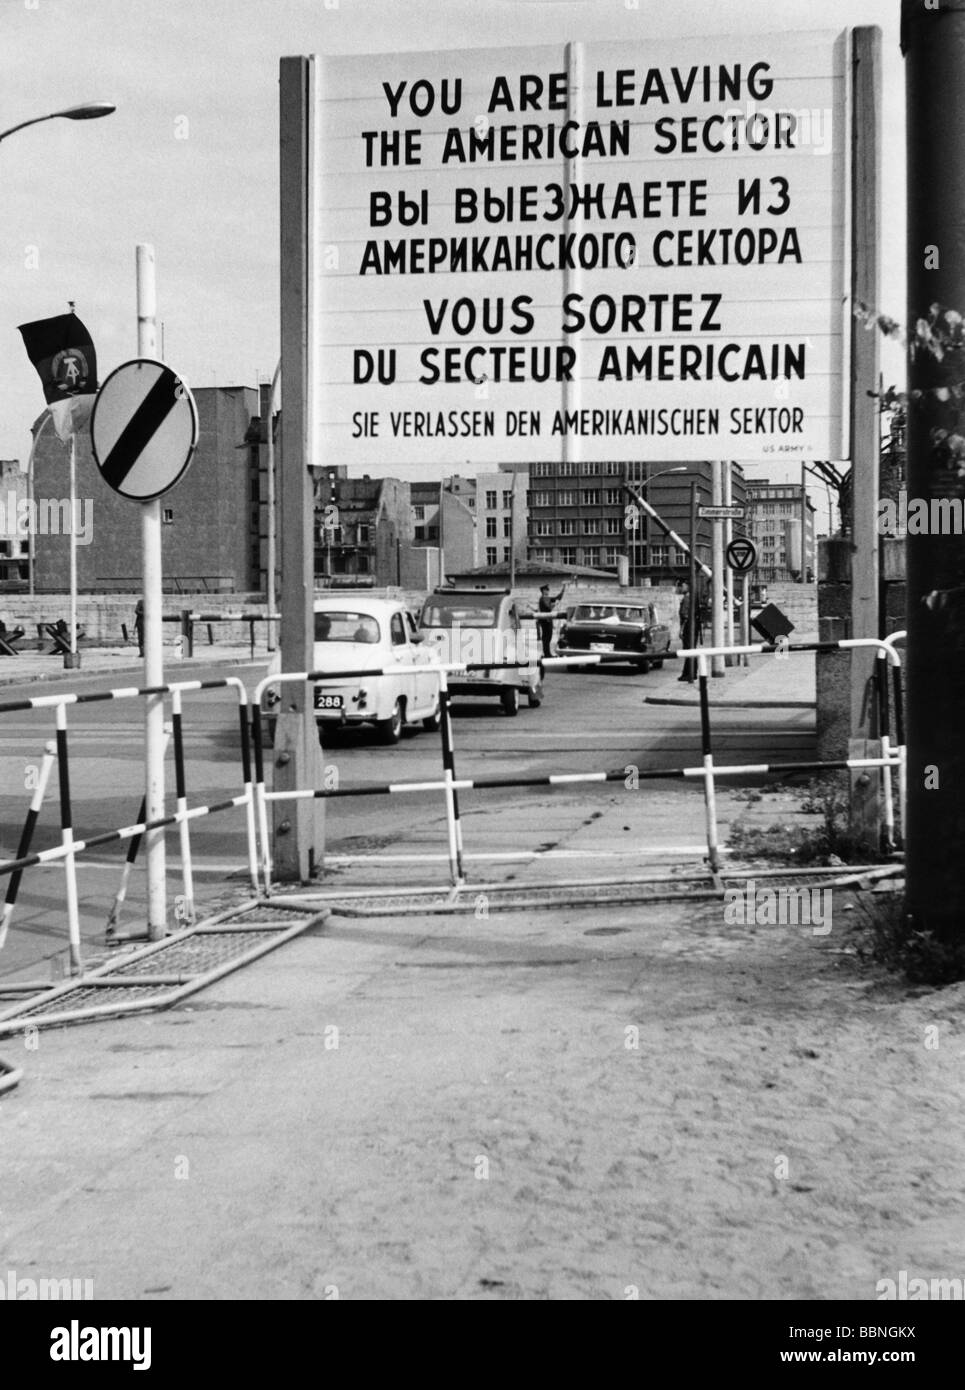 geography / travel, Germany, Berlin, wall, Checkpoint Charlie, border crossing for Allied personal, Friedrichstrasse, sign "You are leaving the American Sector", 1963,  , Stock Photo